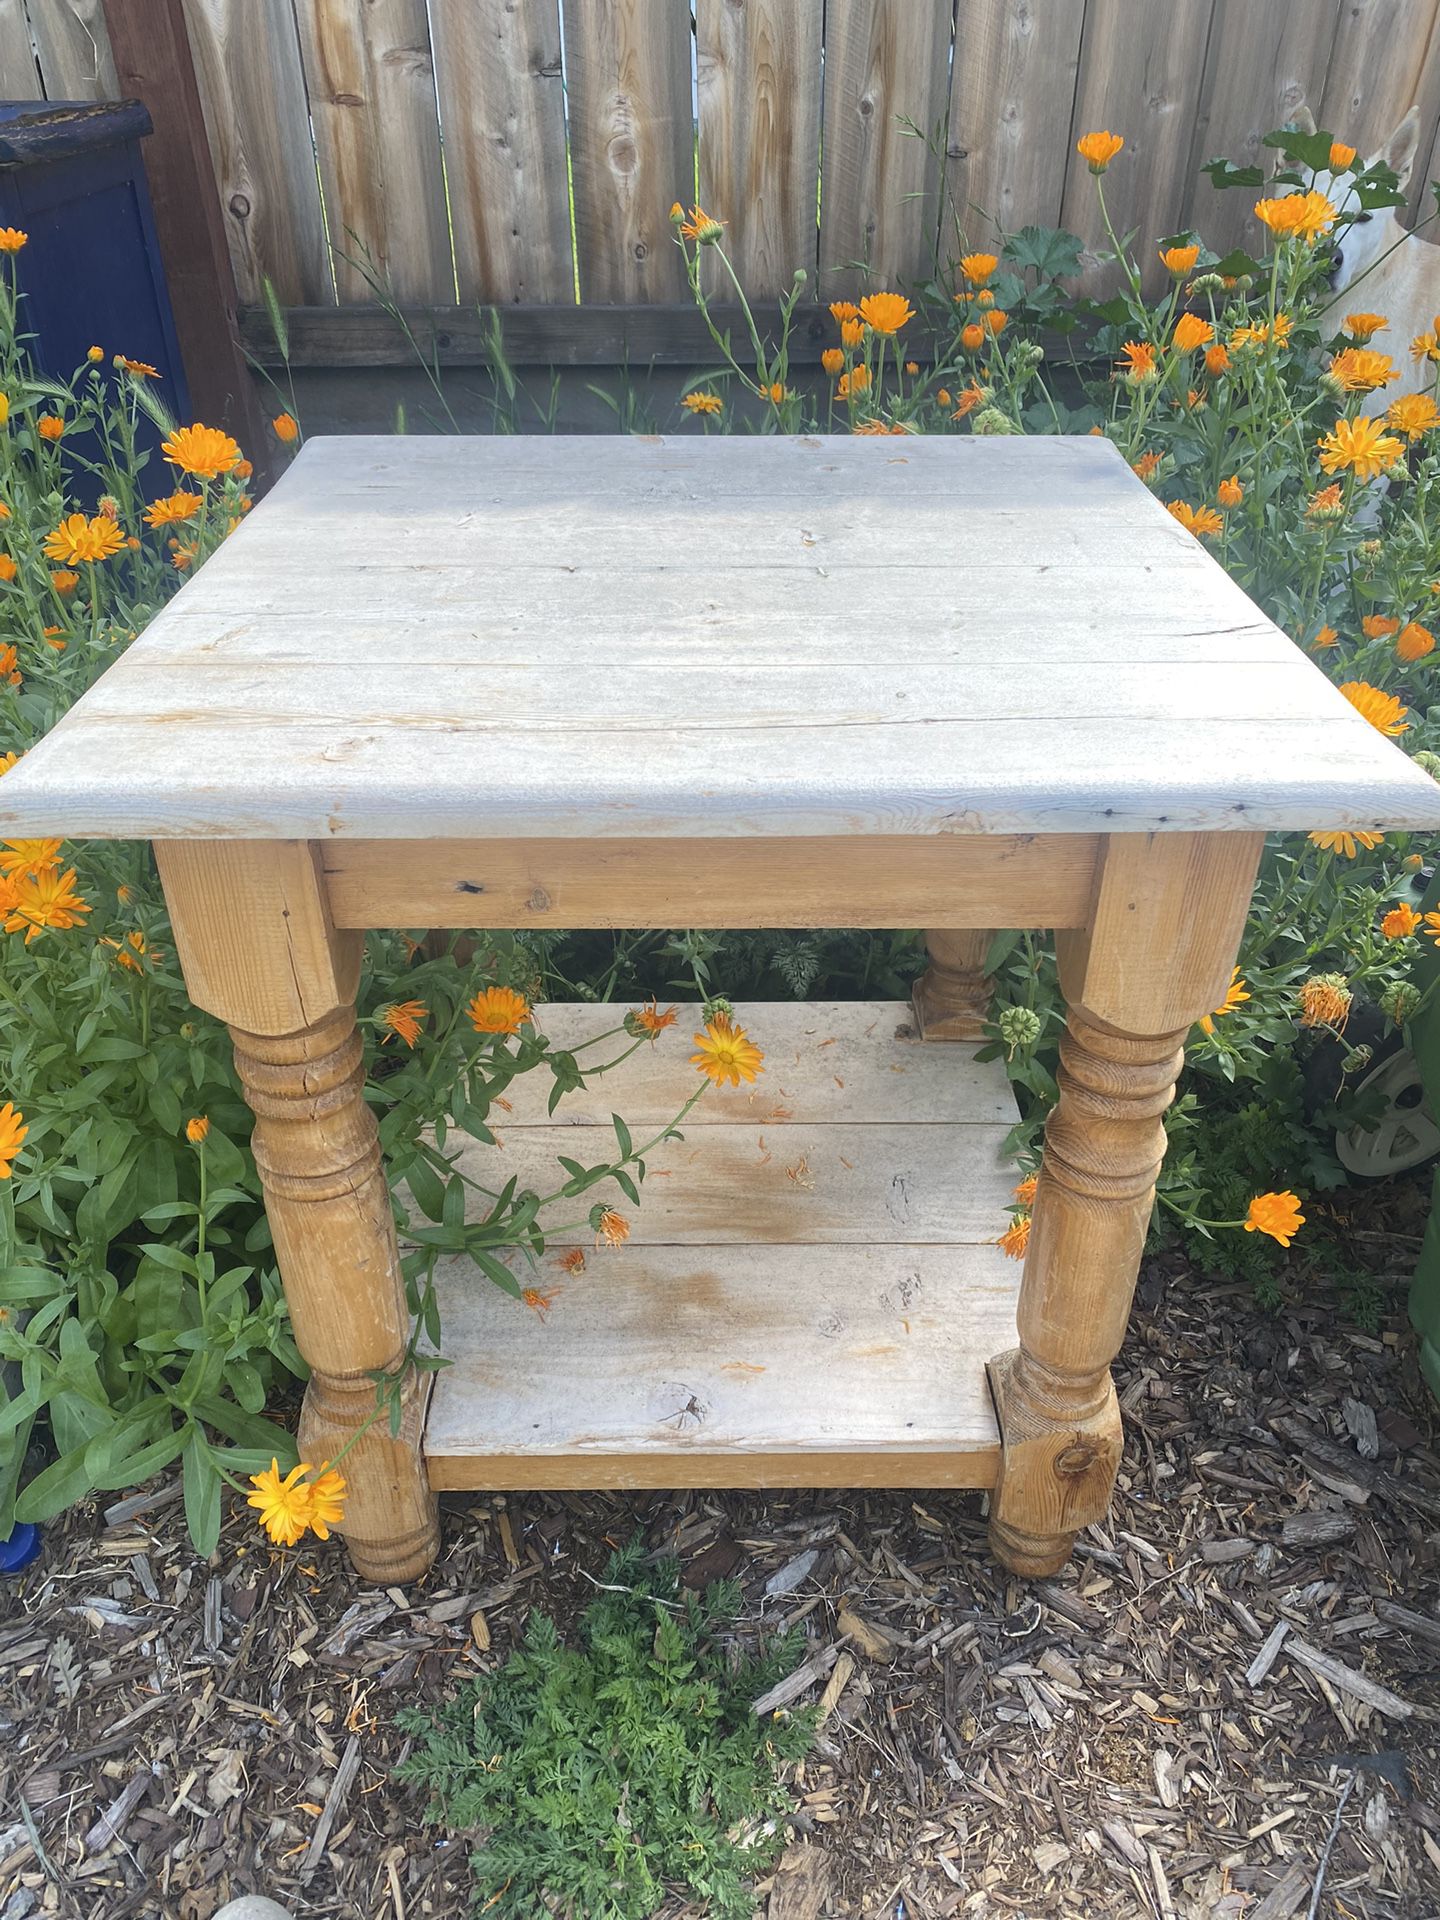 Solid Pine Side table